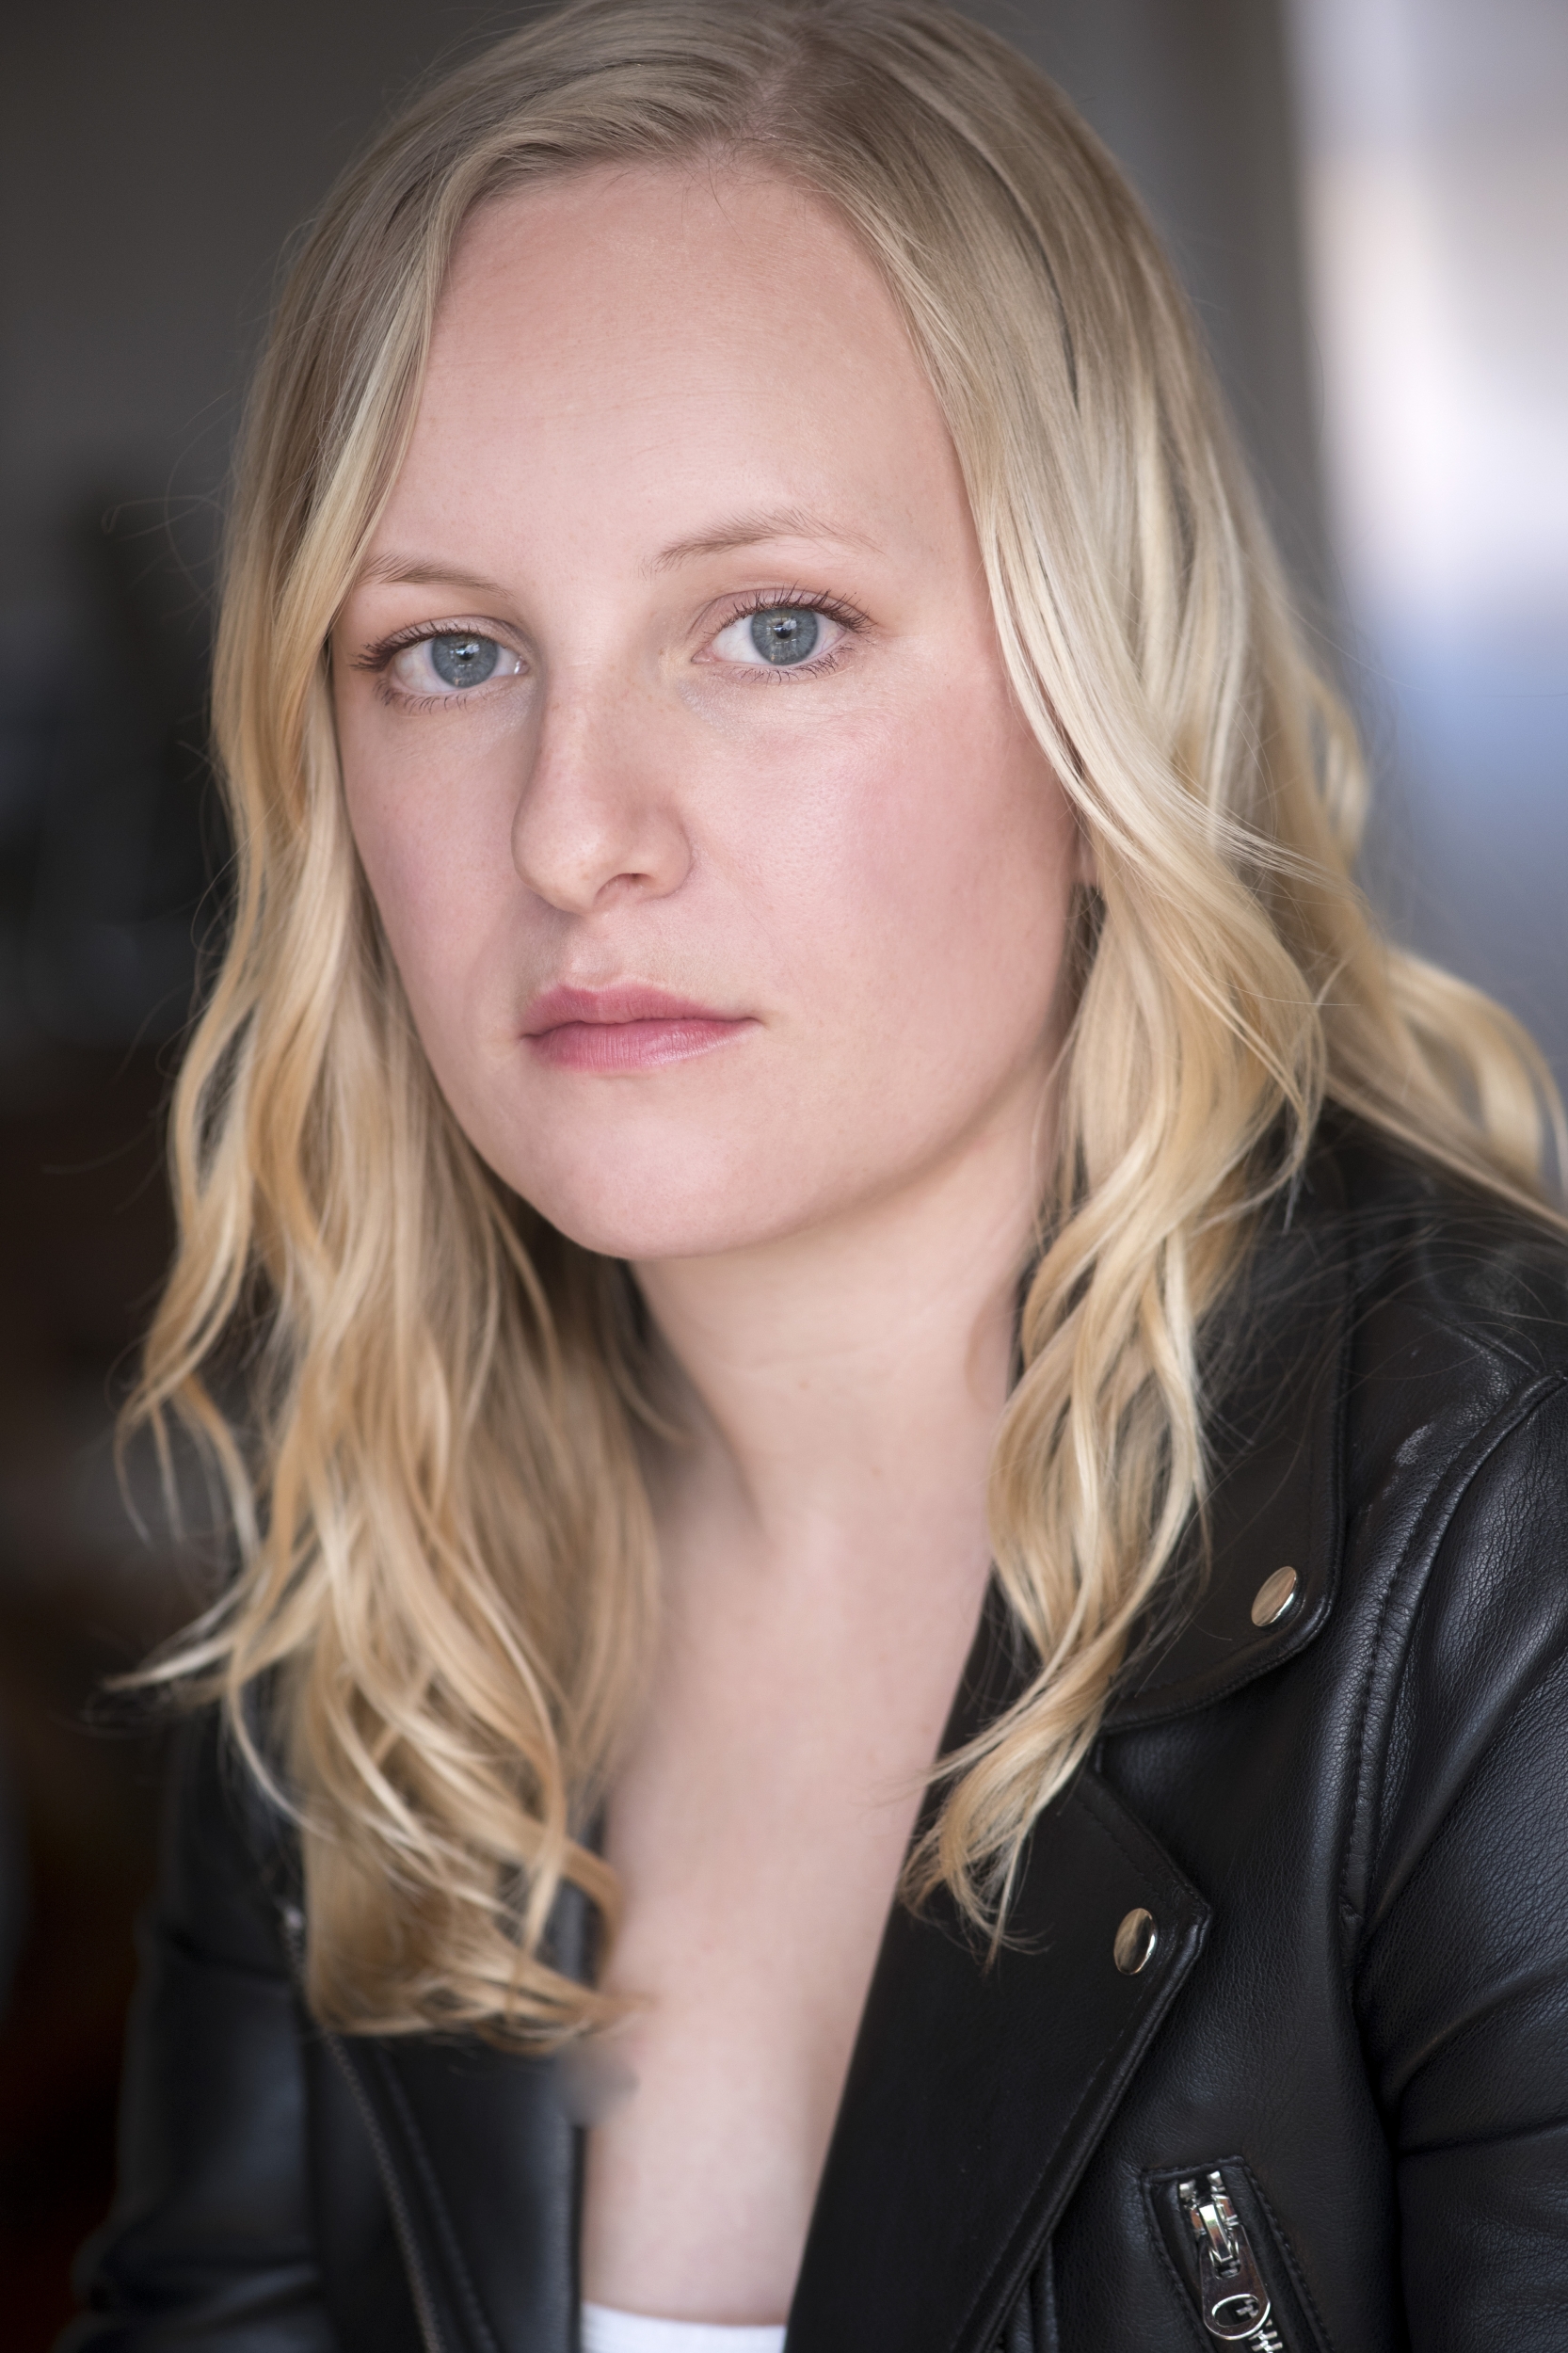 Chloe Greenfield Blonde Actor Headshot Leather Jacket Serious